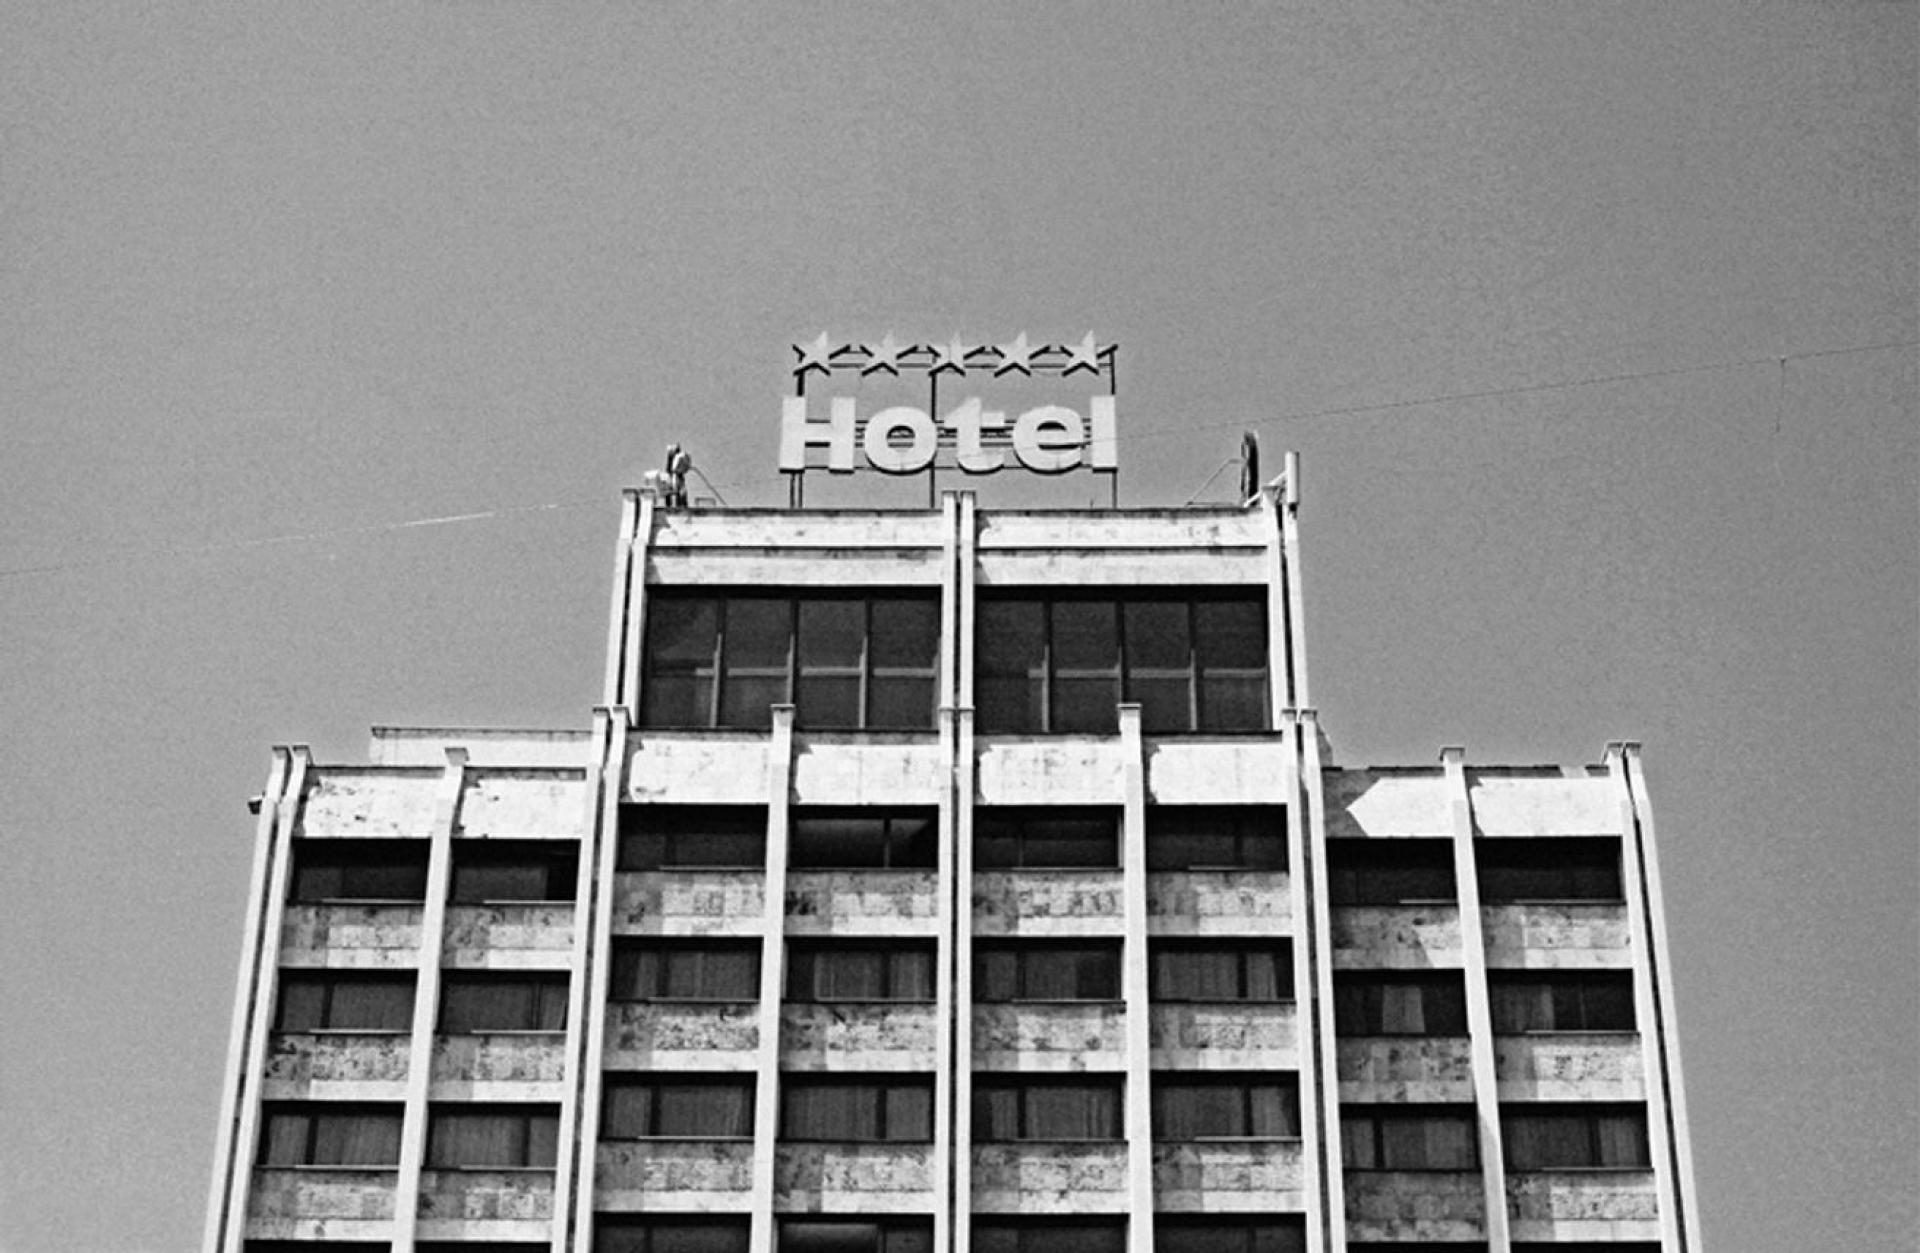 Grand Hotel was build by the only Albanian architect in Kosovo Bashkim Fehmiu.